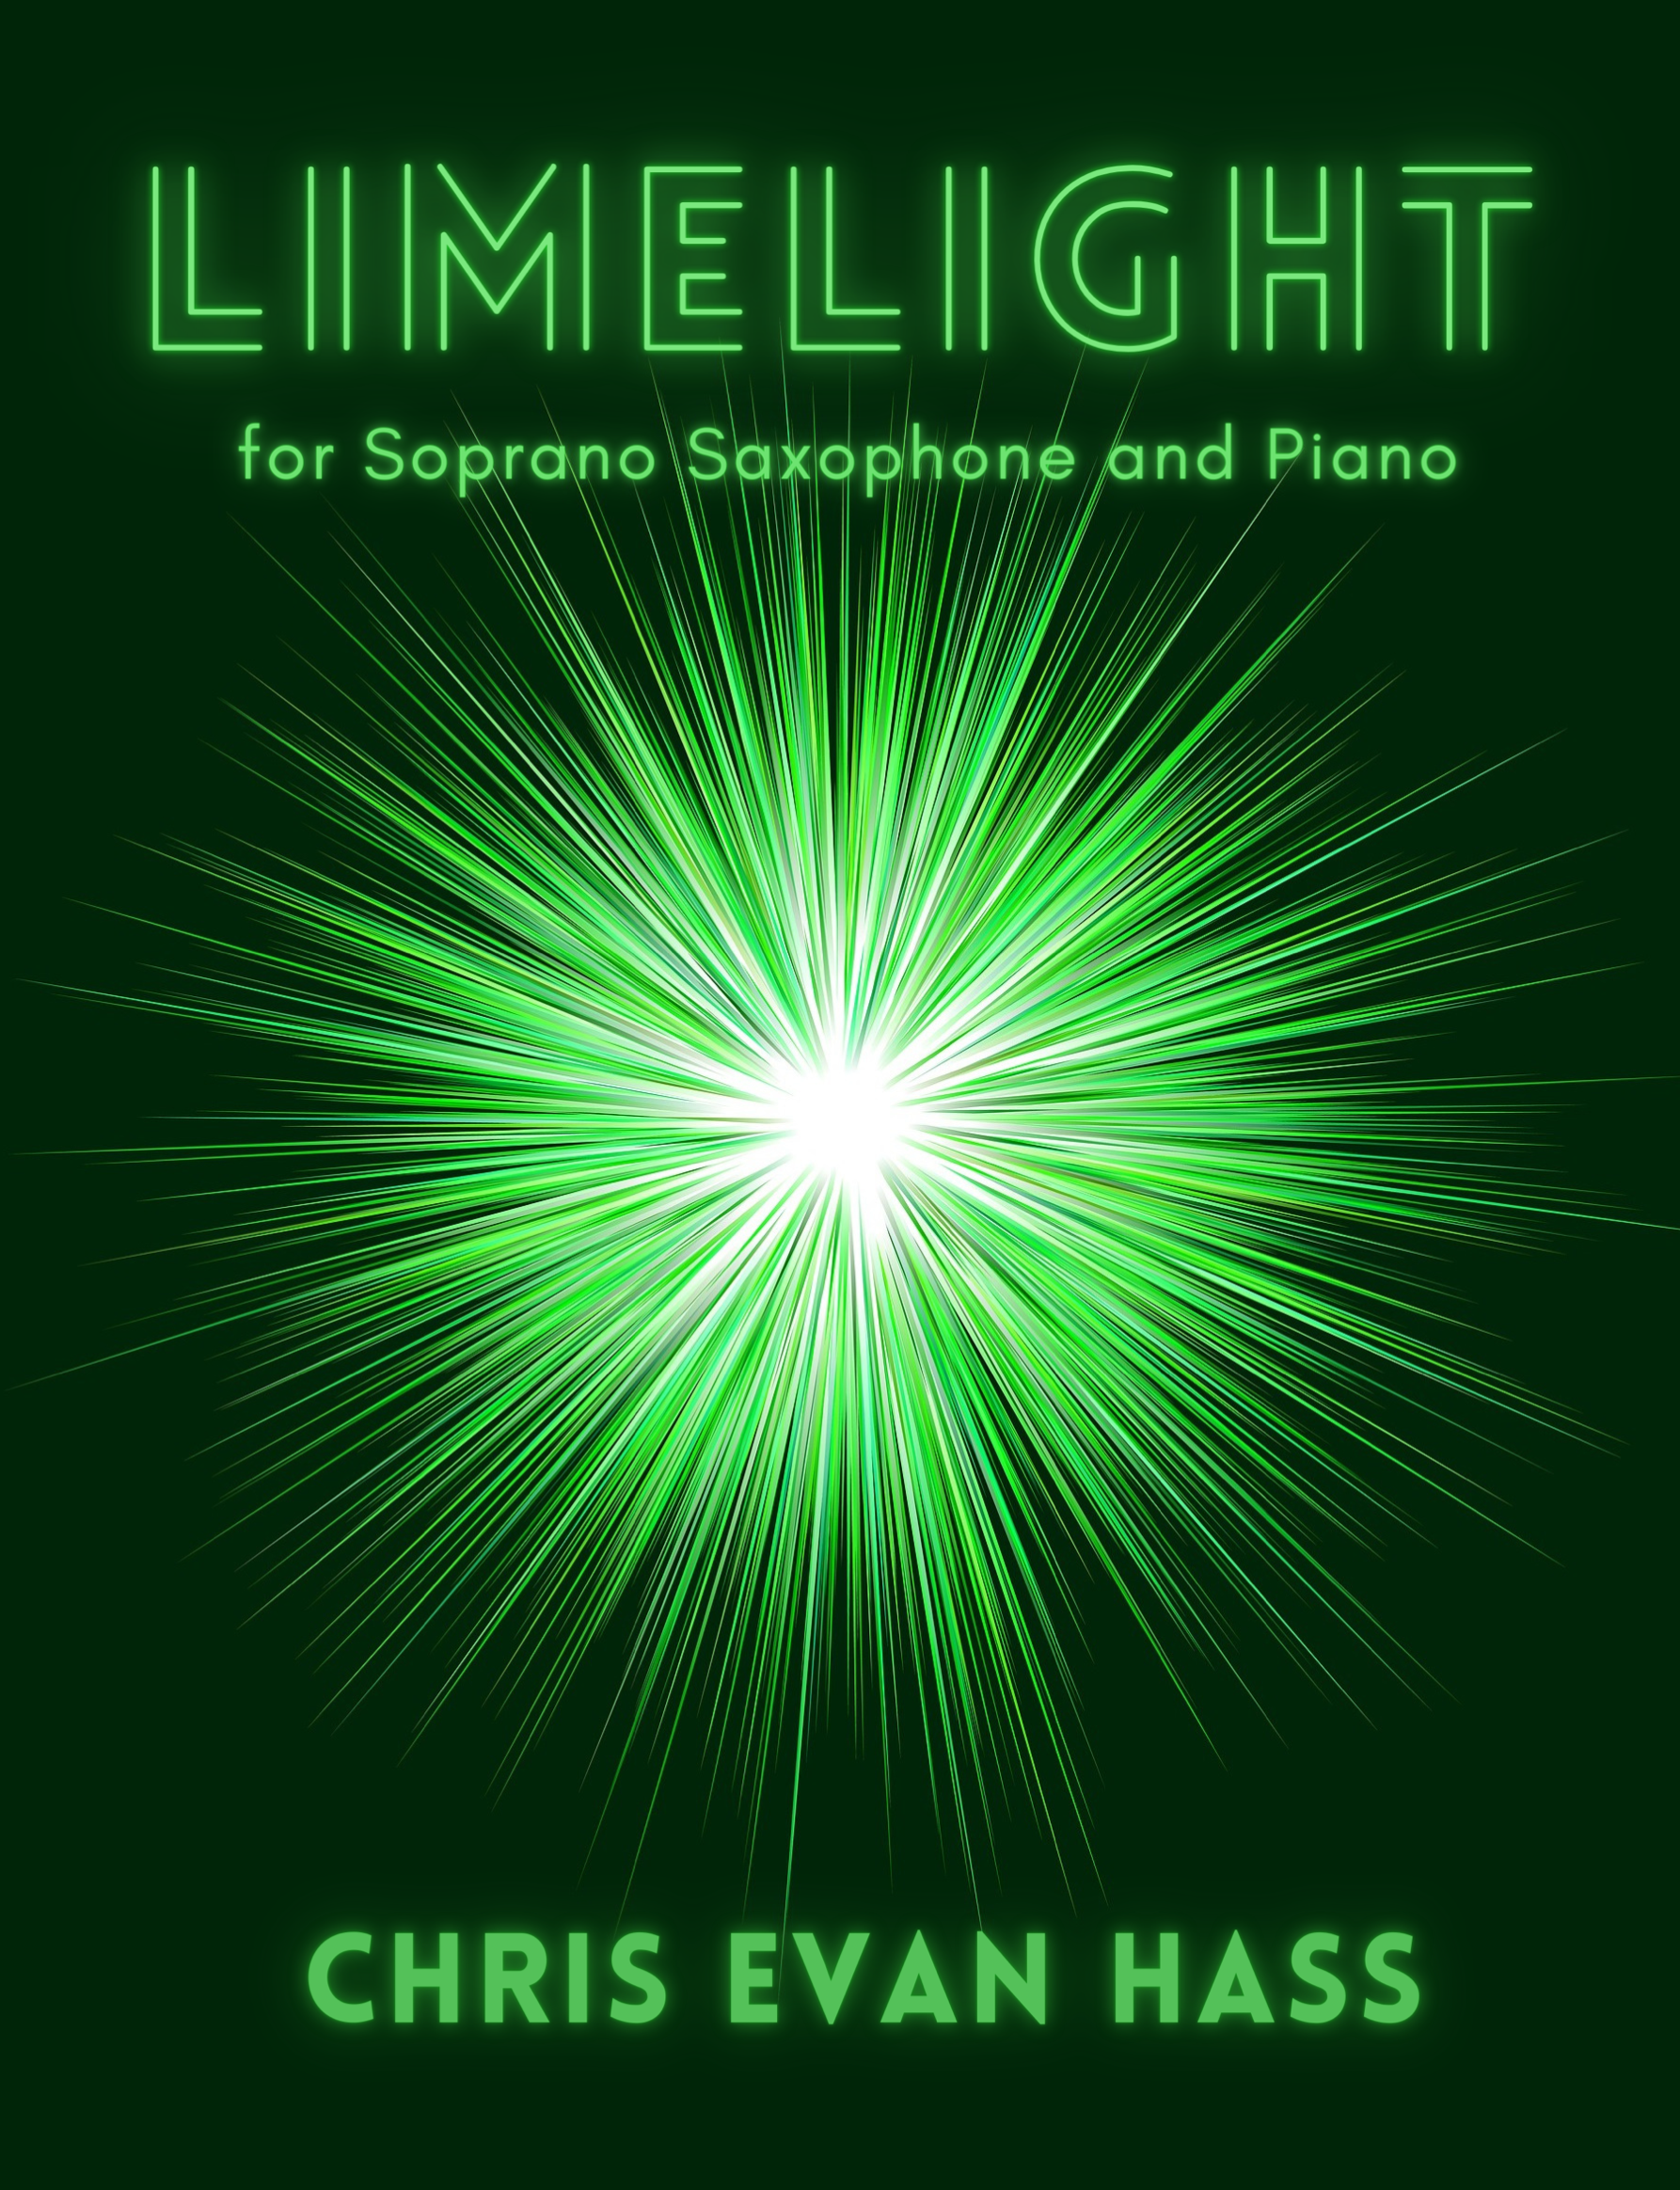 Limelight by Chris Evan Hass